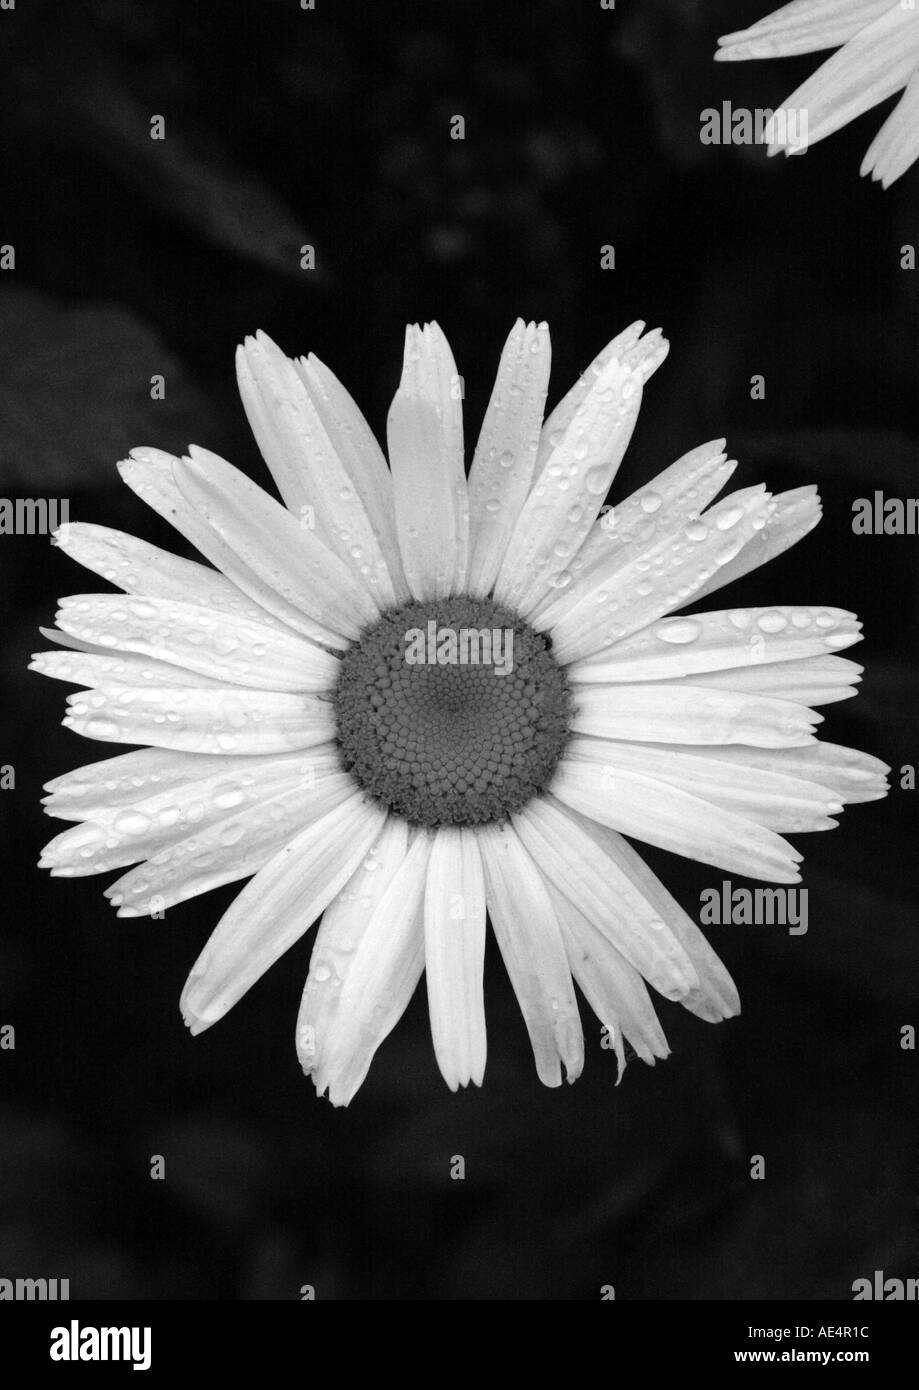 single daisy in black and white Stock Photo